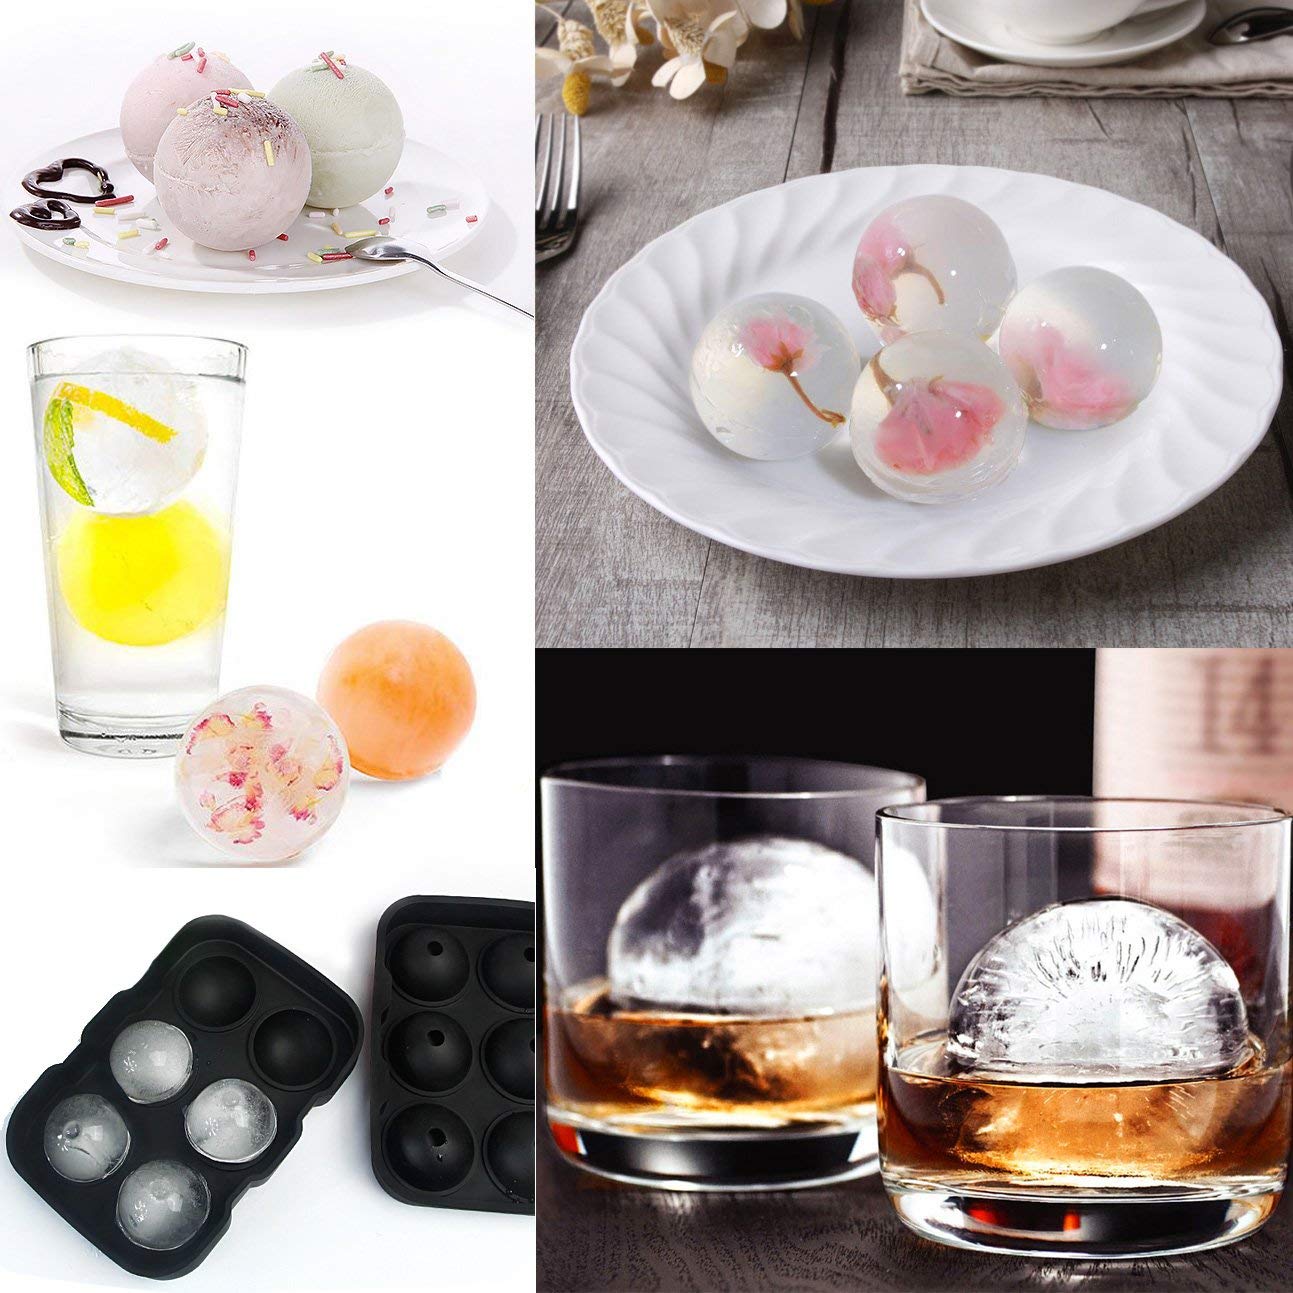 2 Pack wholesale custom round ball Whiskey Beer 6 giant cubes large silicone ice cube tray mold for Kitchen Party Bar